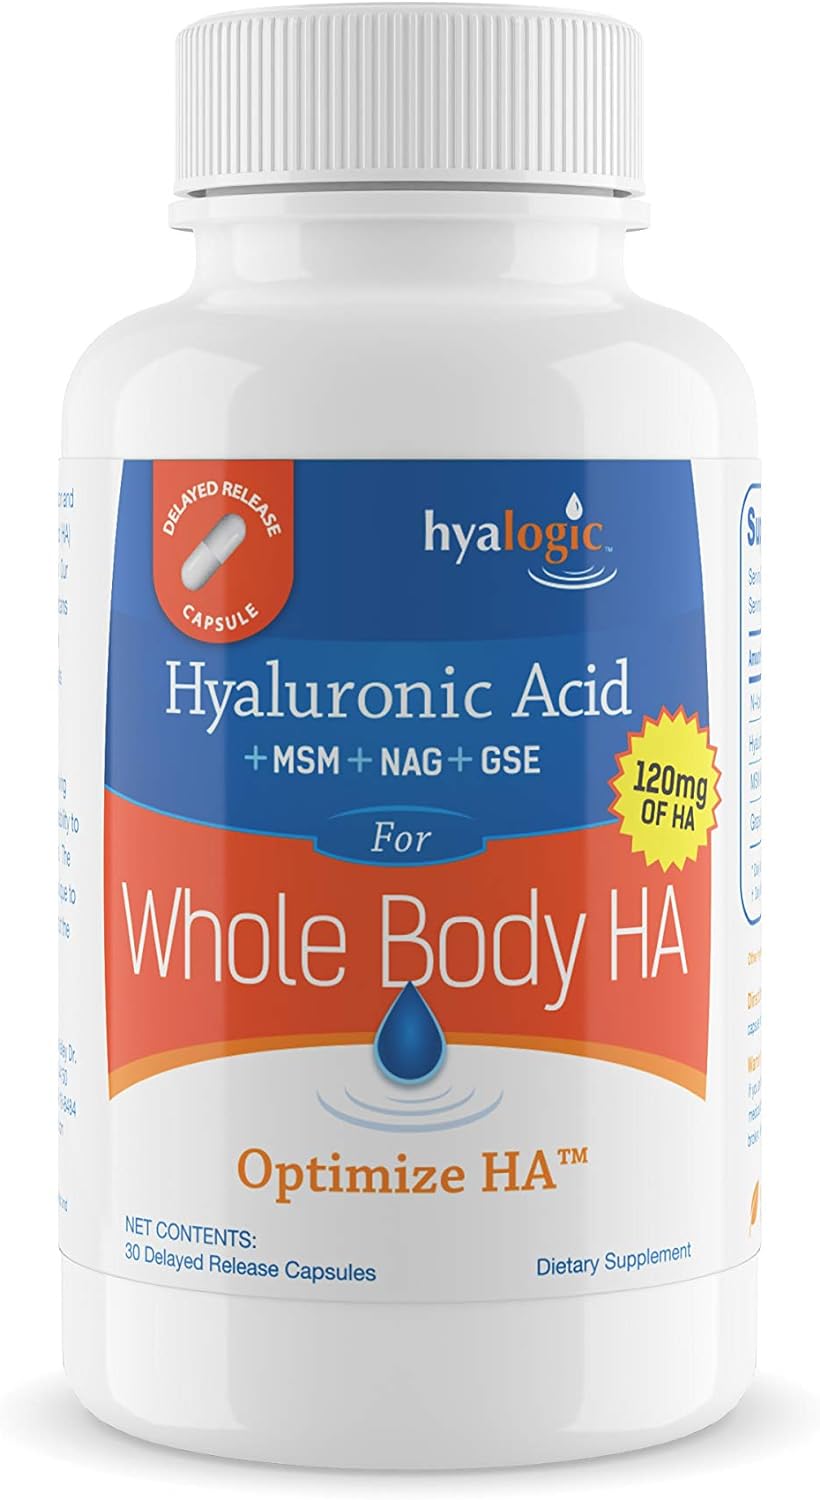 Hyalogic Hyaluronic Acid 120 mg Delayed Release Capsules | Combo Formula w/Glucosamine MSM | Support Healthy Joints, Eyes and Skin and Overall Body | Promote Healthy Skin | Non-GMO (30 Count)